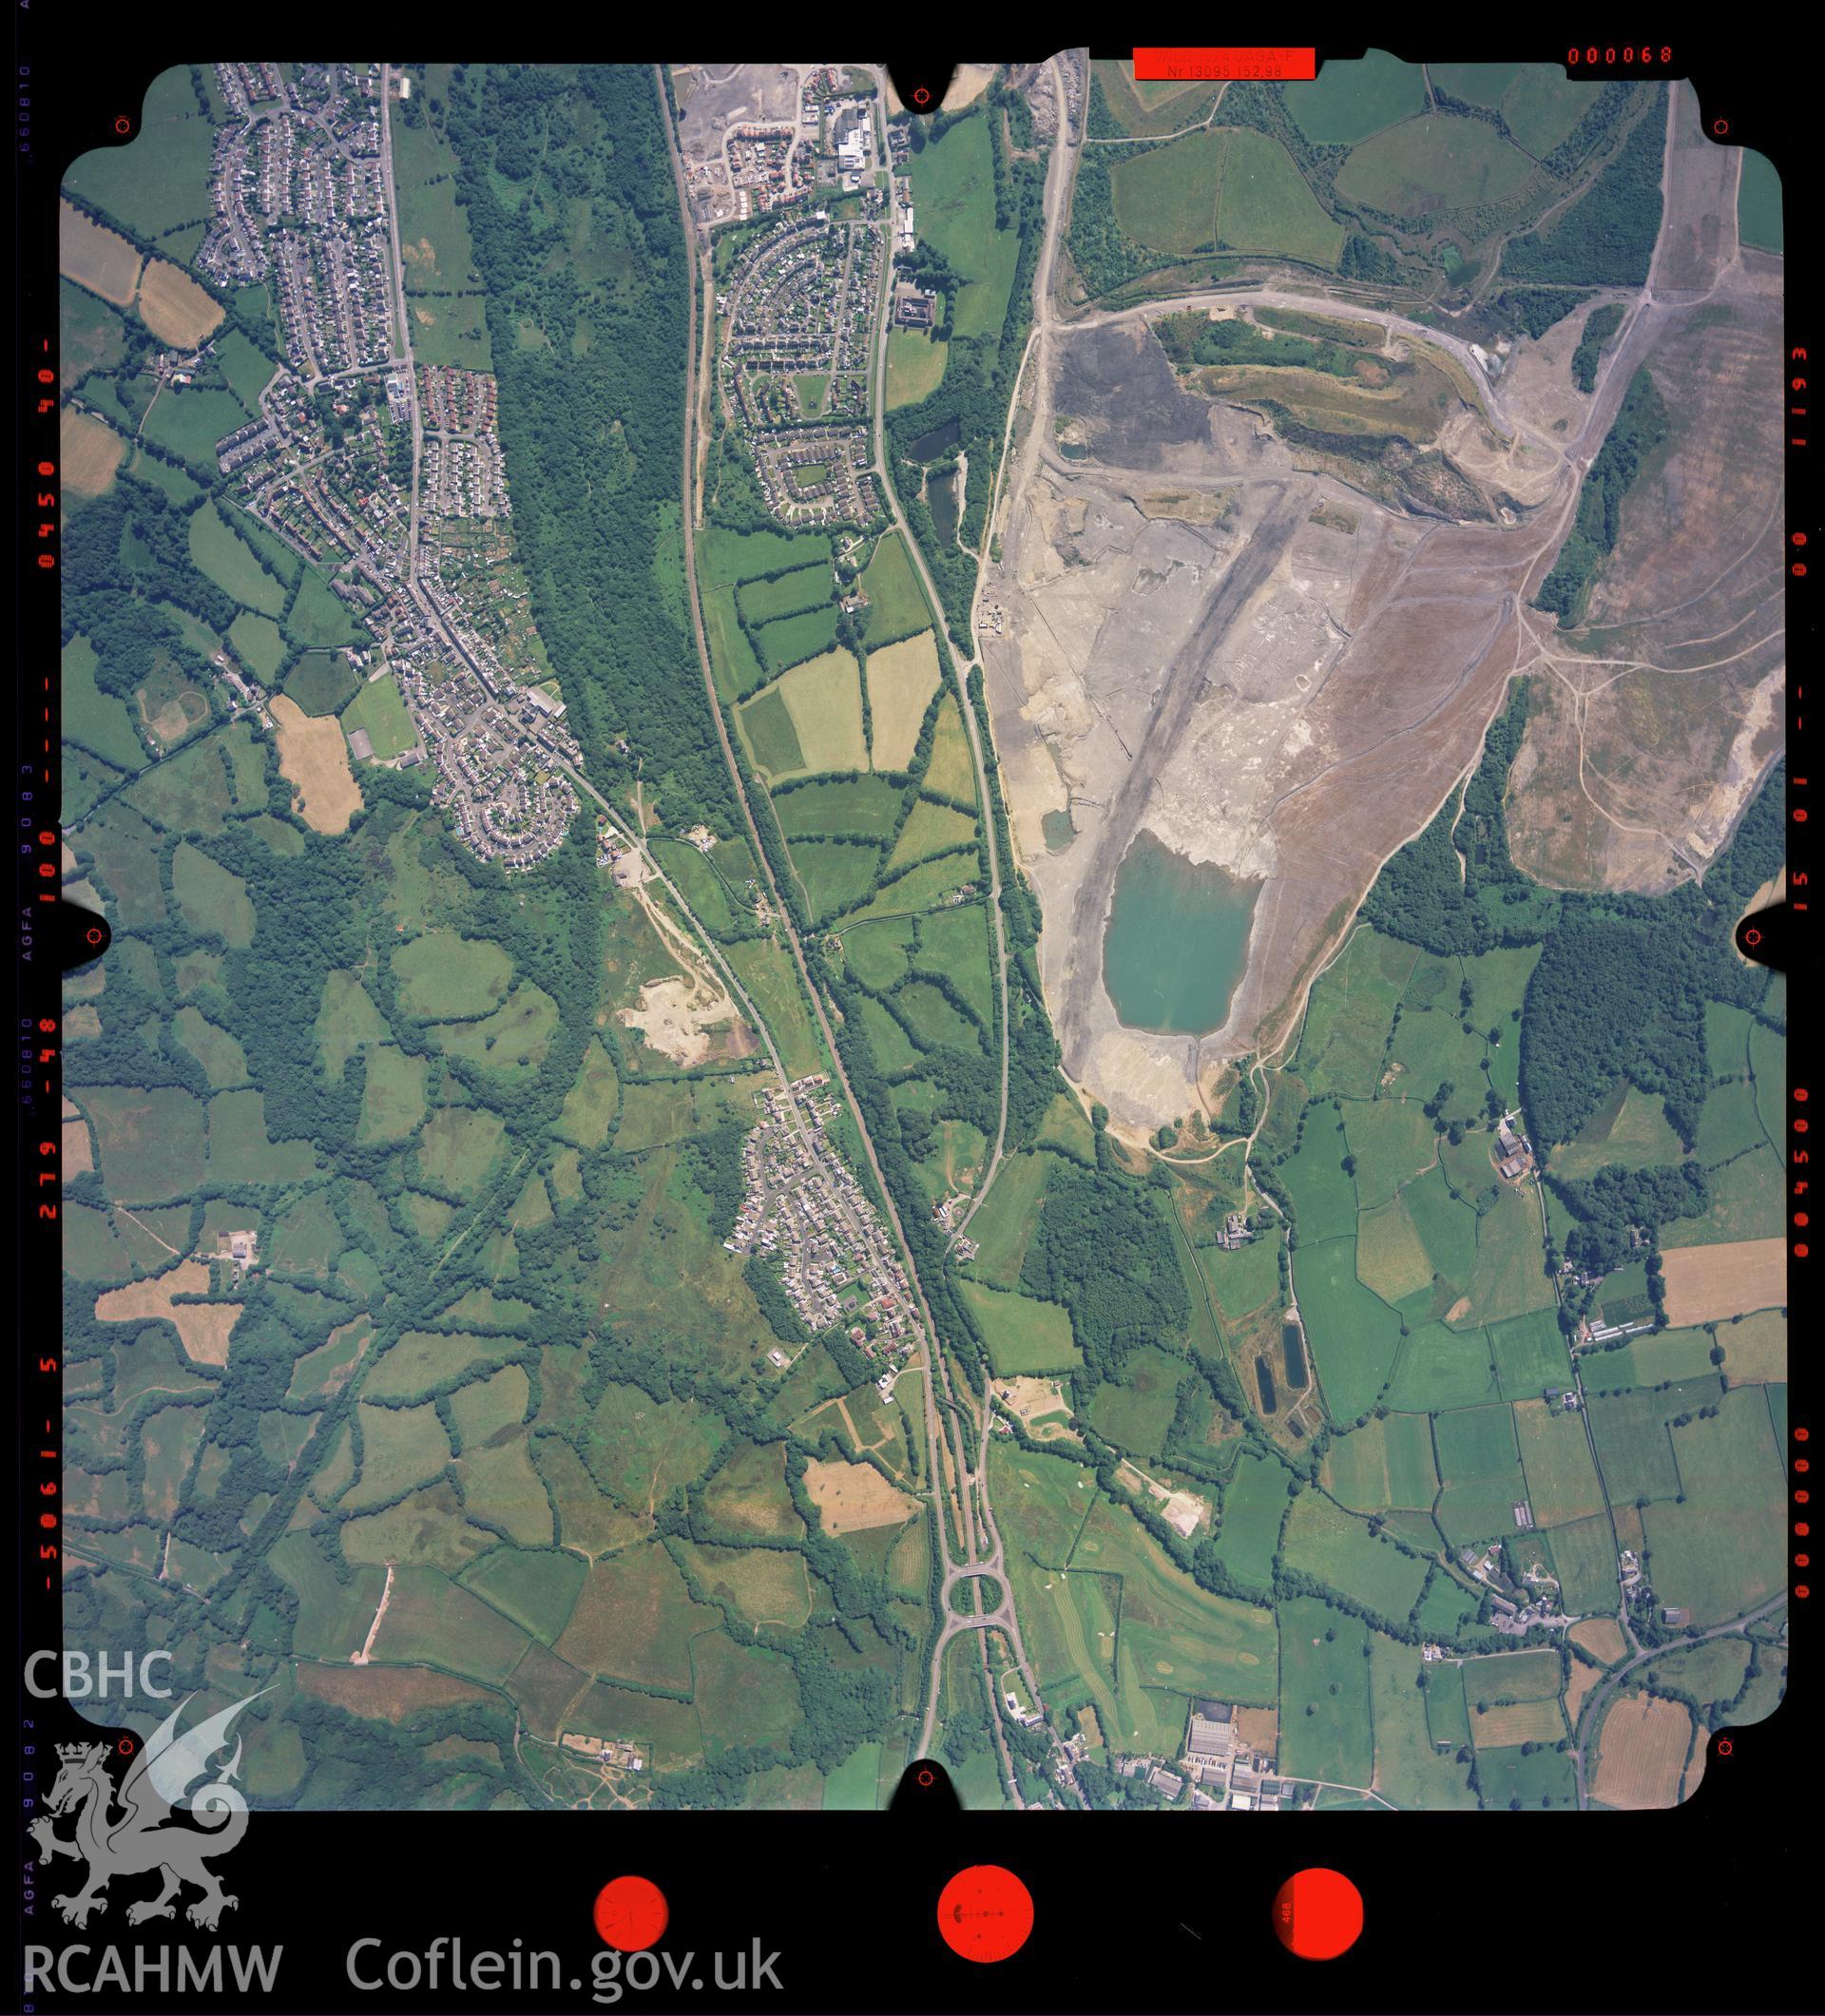 Digitized copy of a colour aerial photograph showing the area around Brynna, taken by Ordnance Survey, 2003.